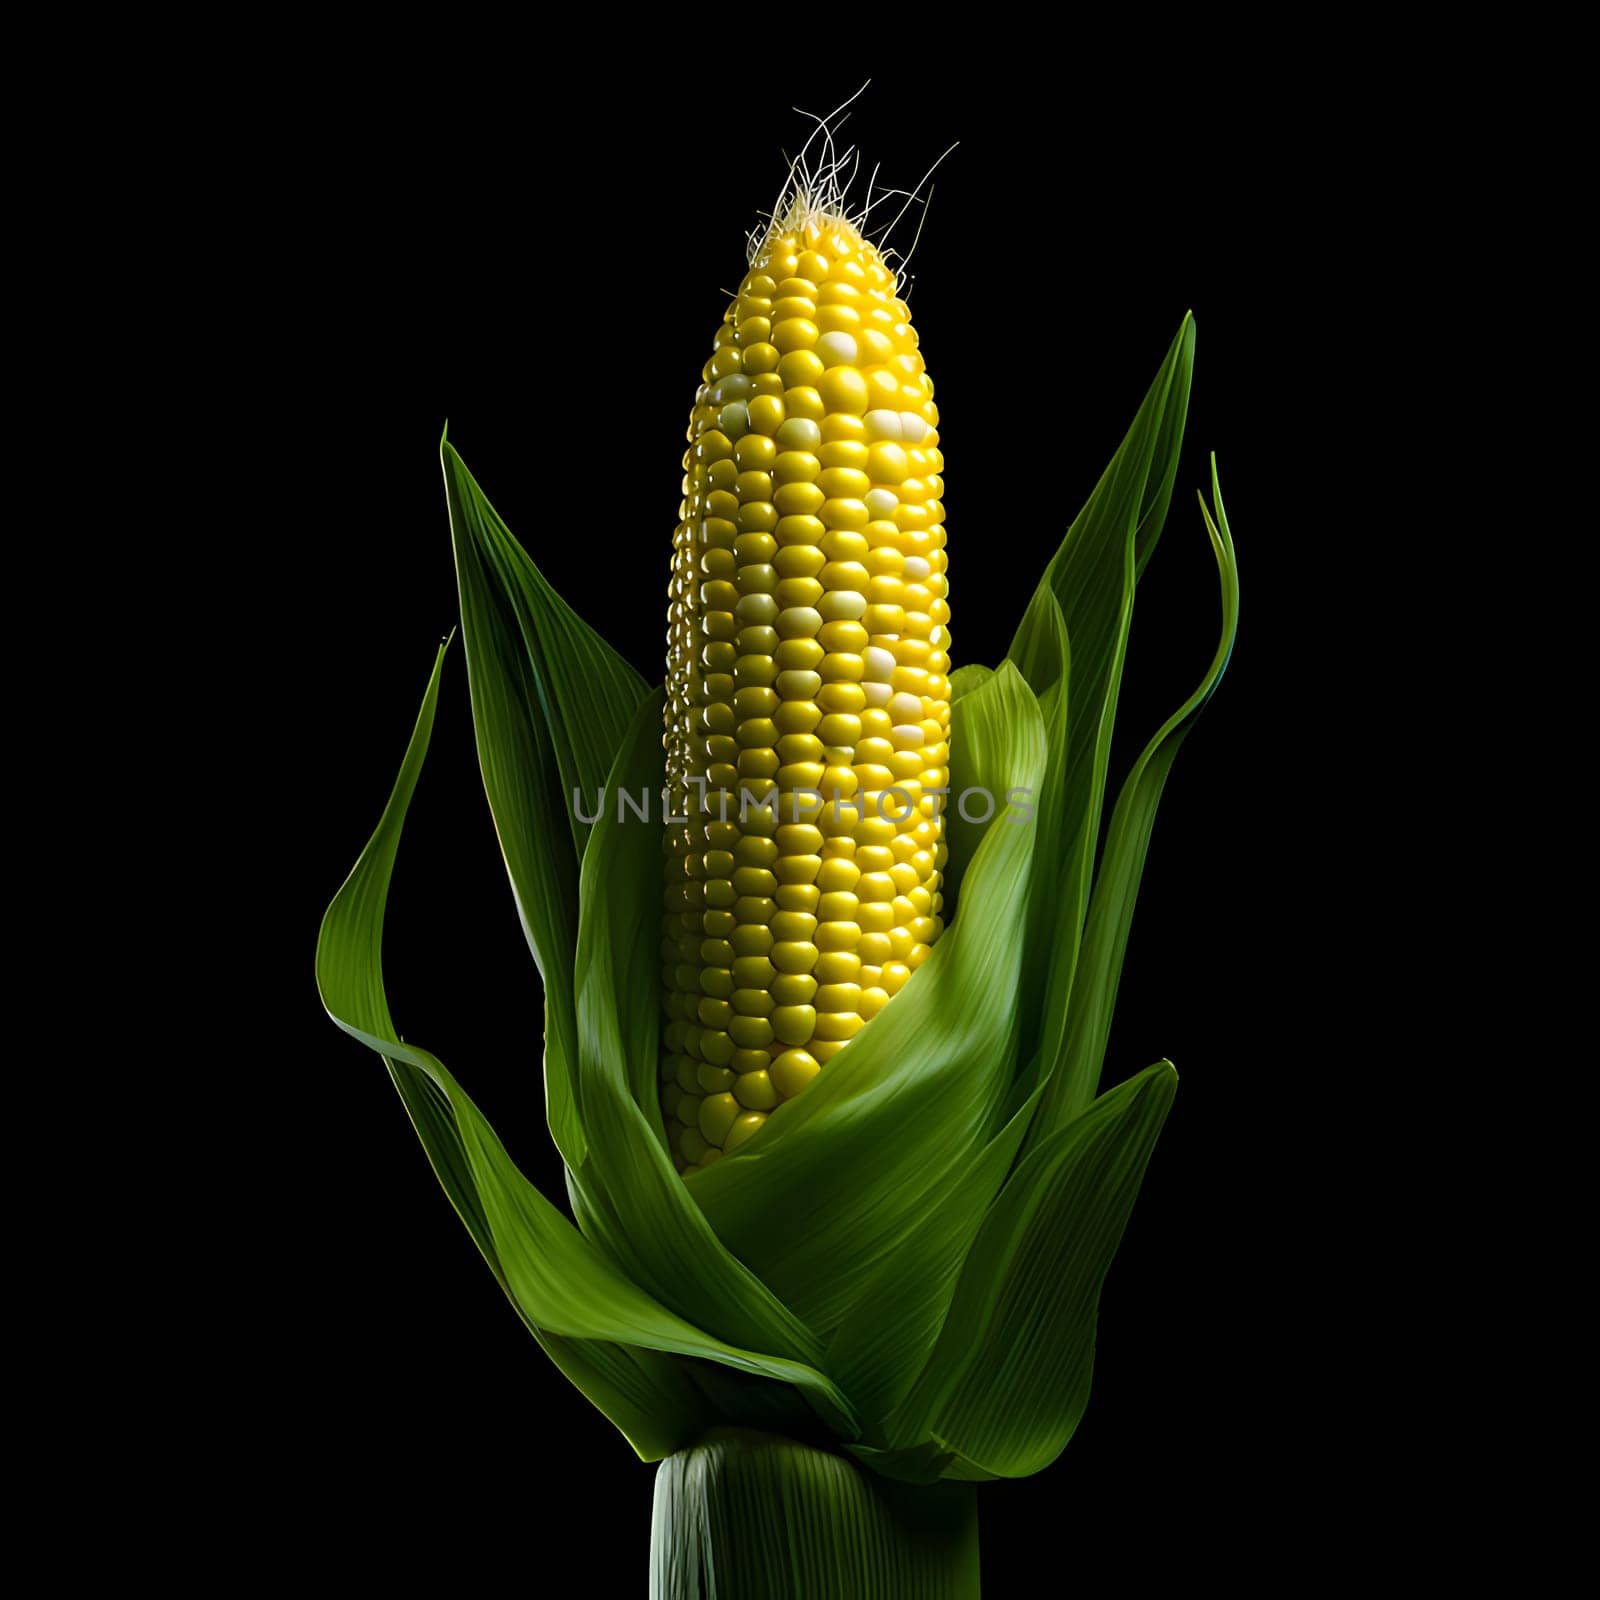 Yellow cob, corn with green leaves on the stalk, isolated black background. Corn as a dish of thanksgiving for the harvest. An atmosphere of joy and celebration.